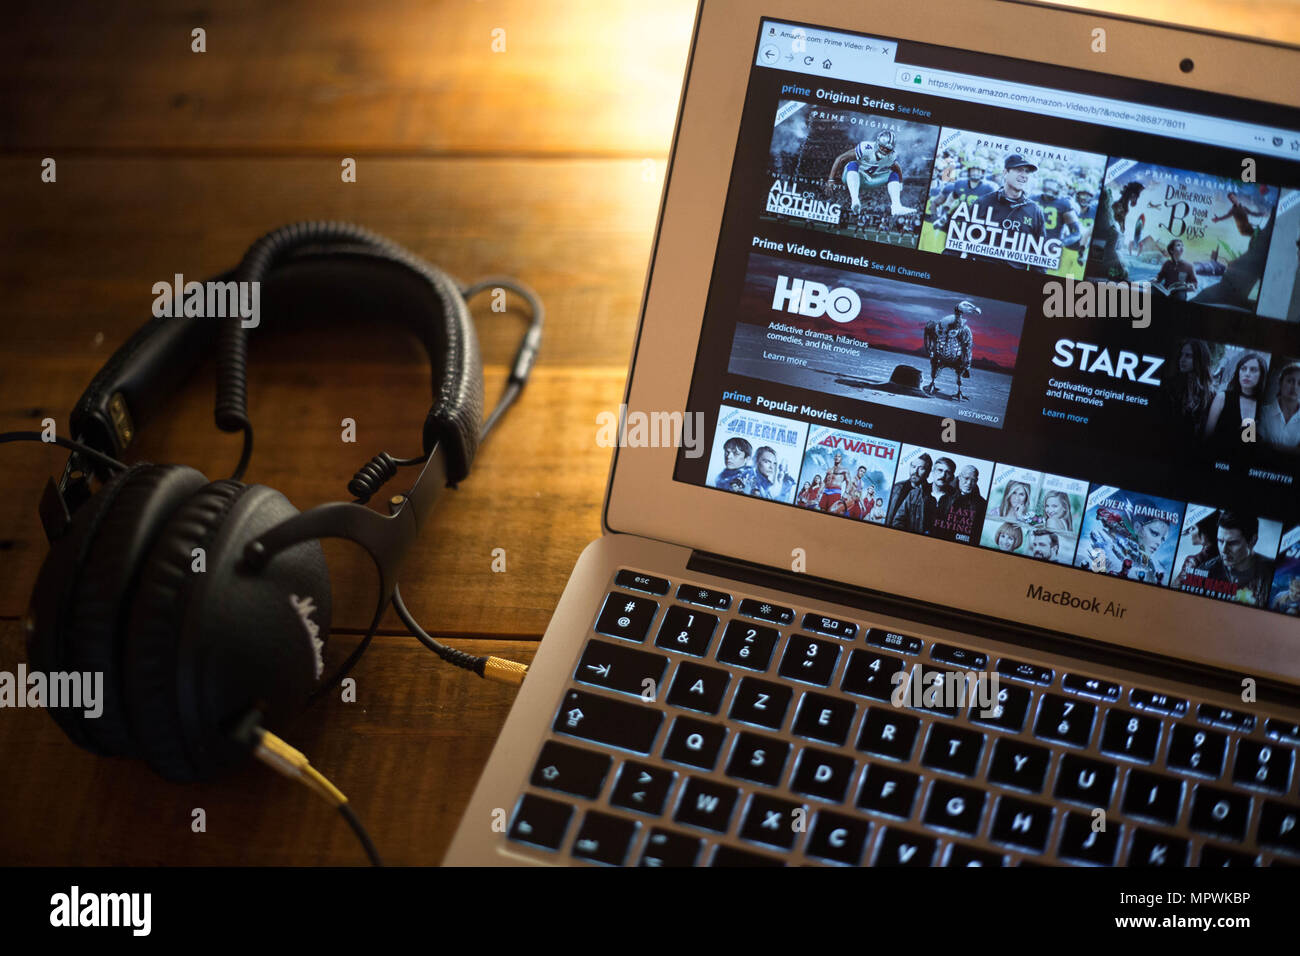 How to watch amazon prime video on macbook air